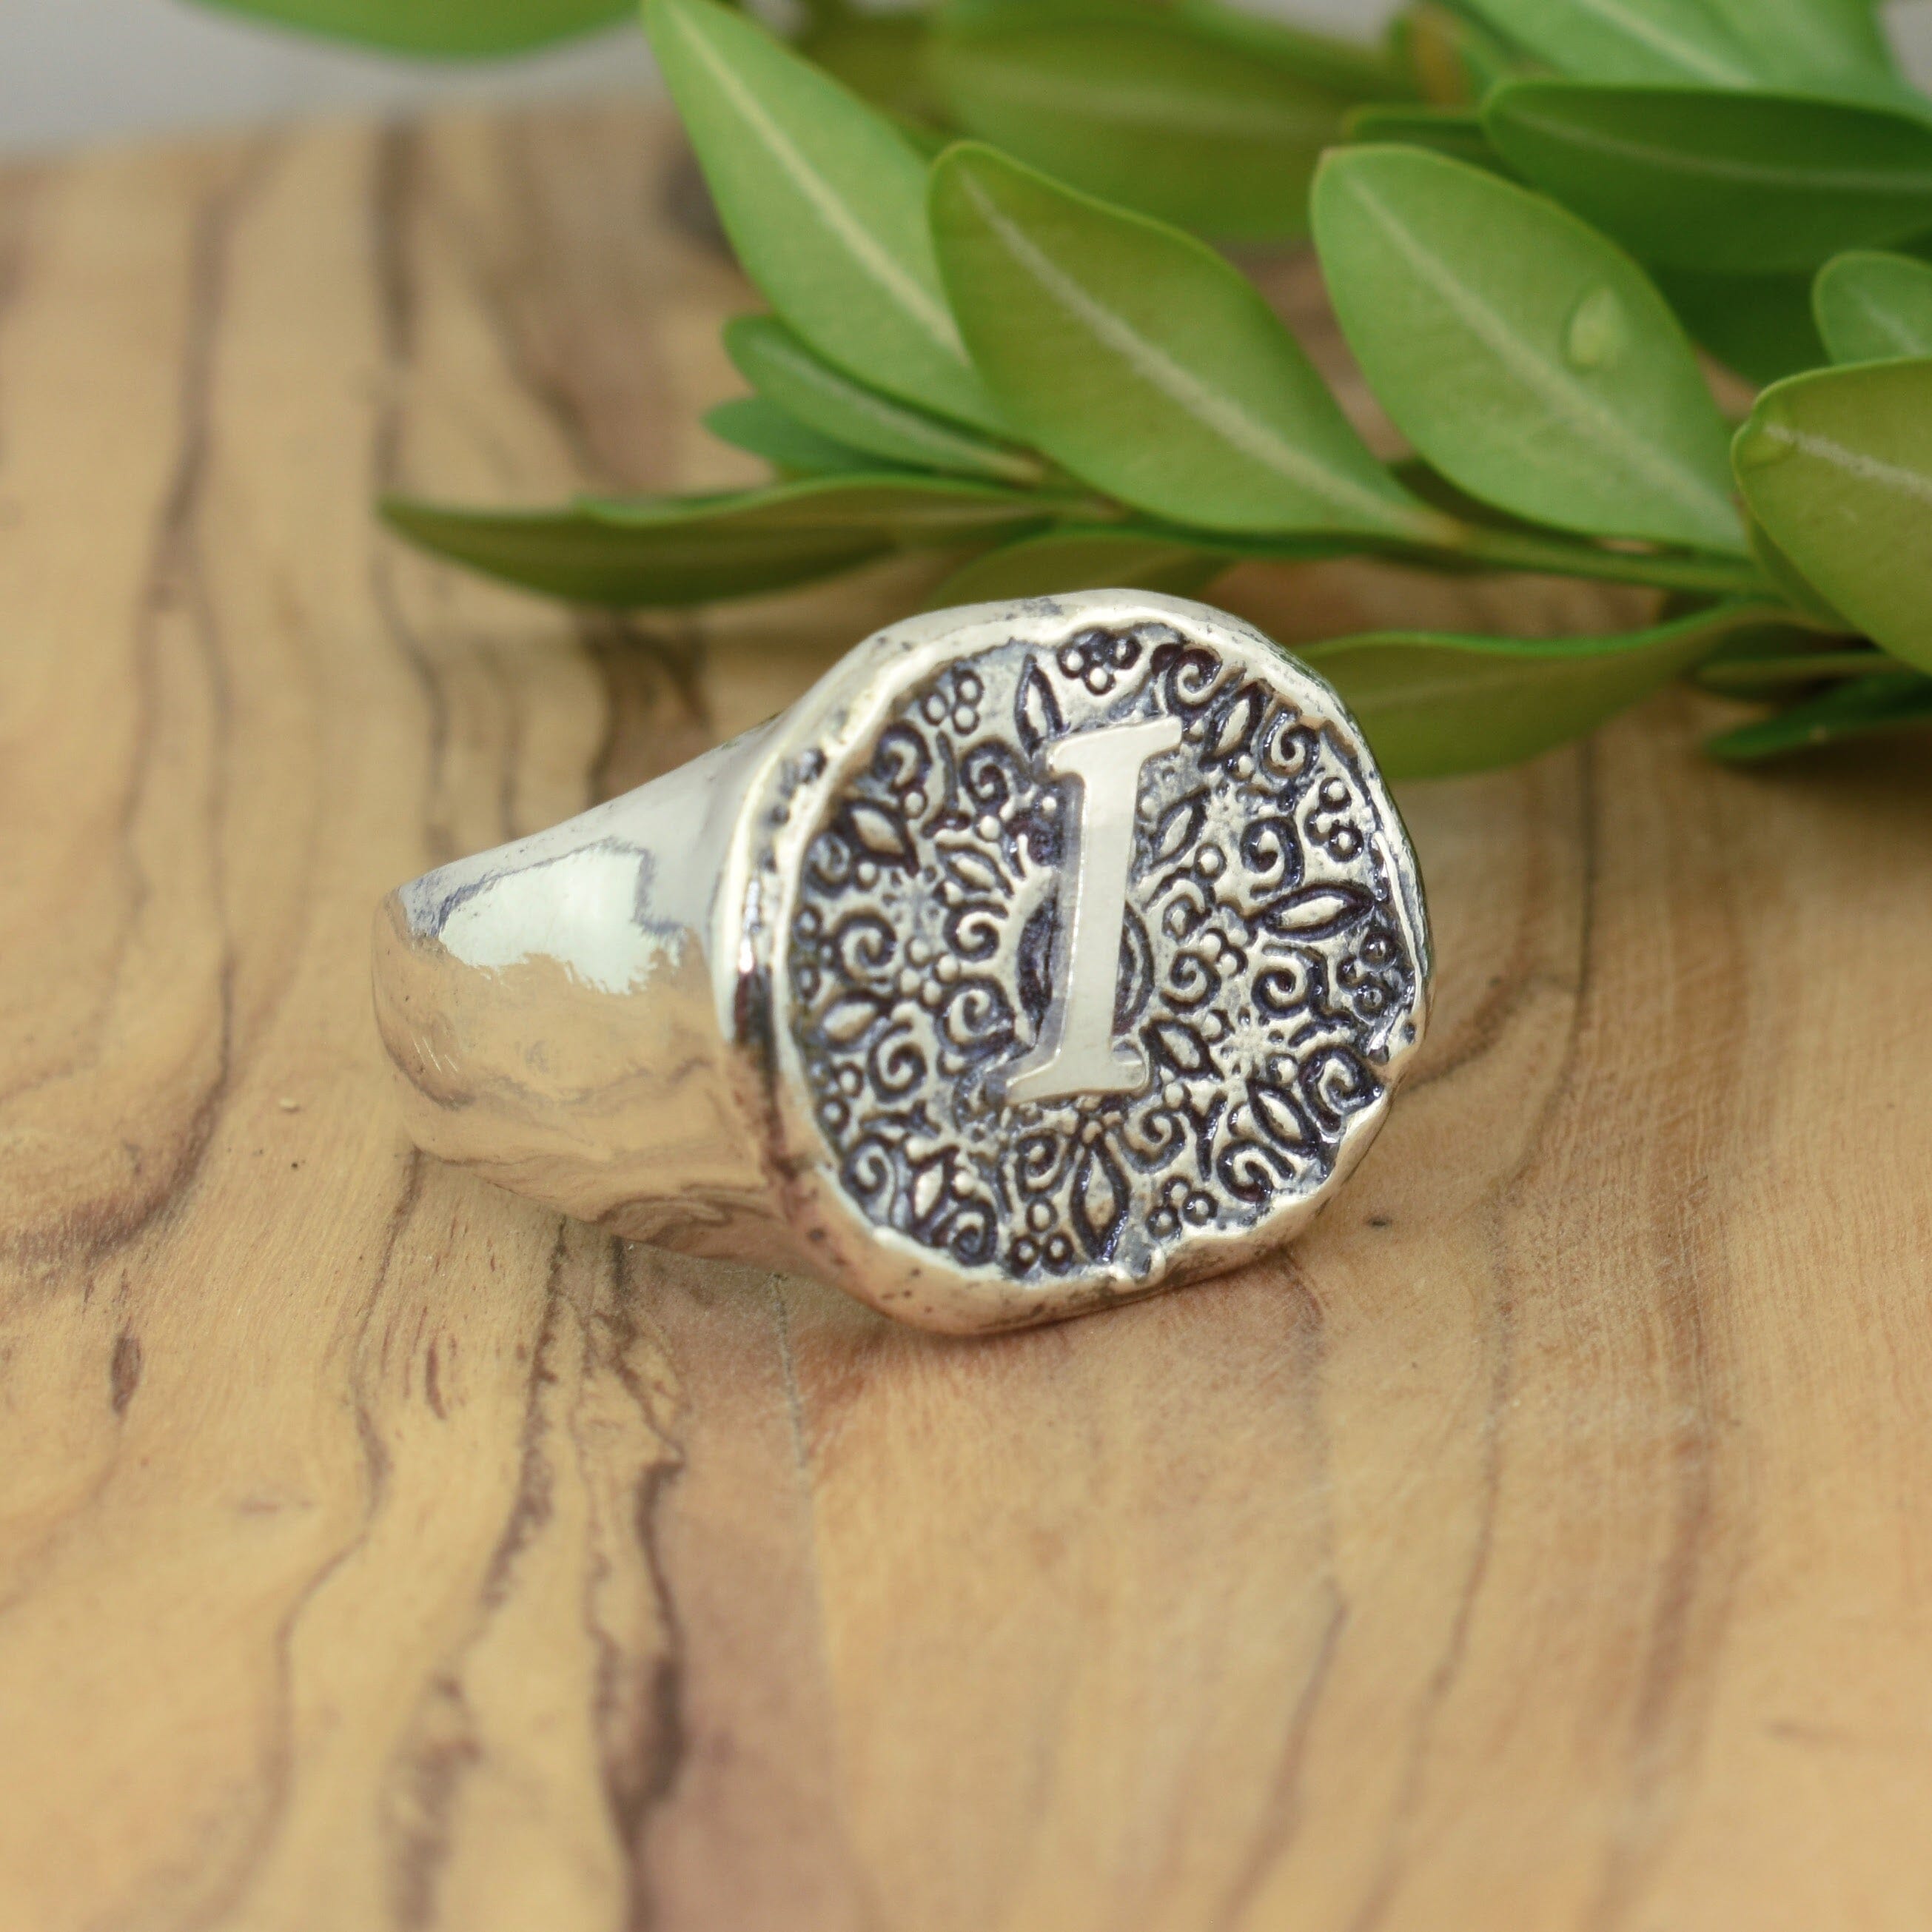 Slightly Imperfect - Signet Ring (Initial I, Size 11)